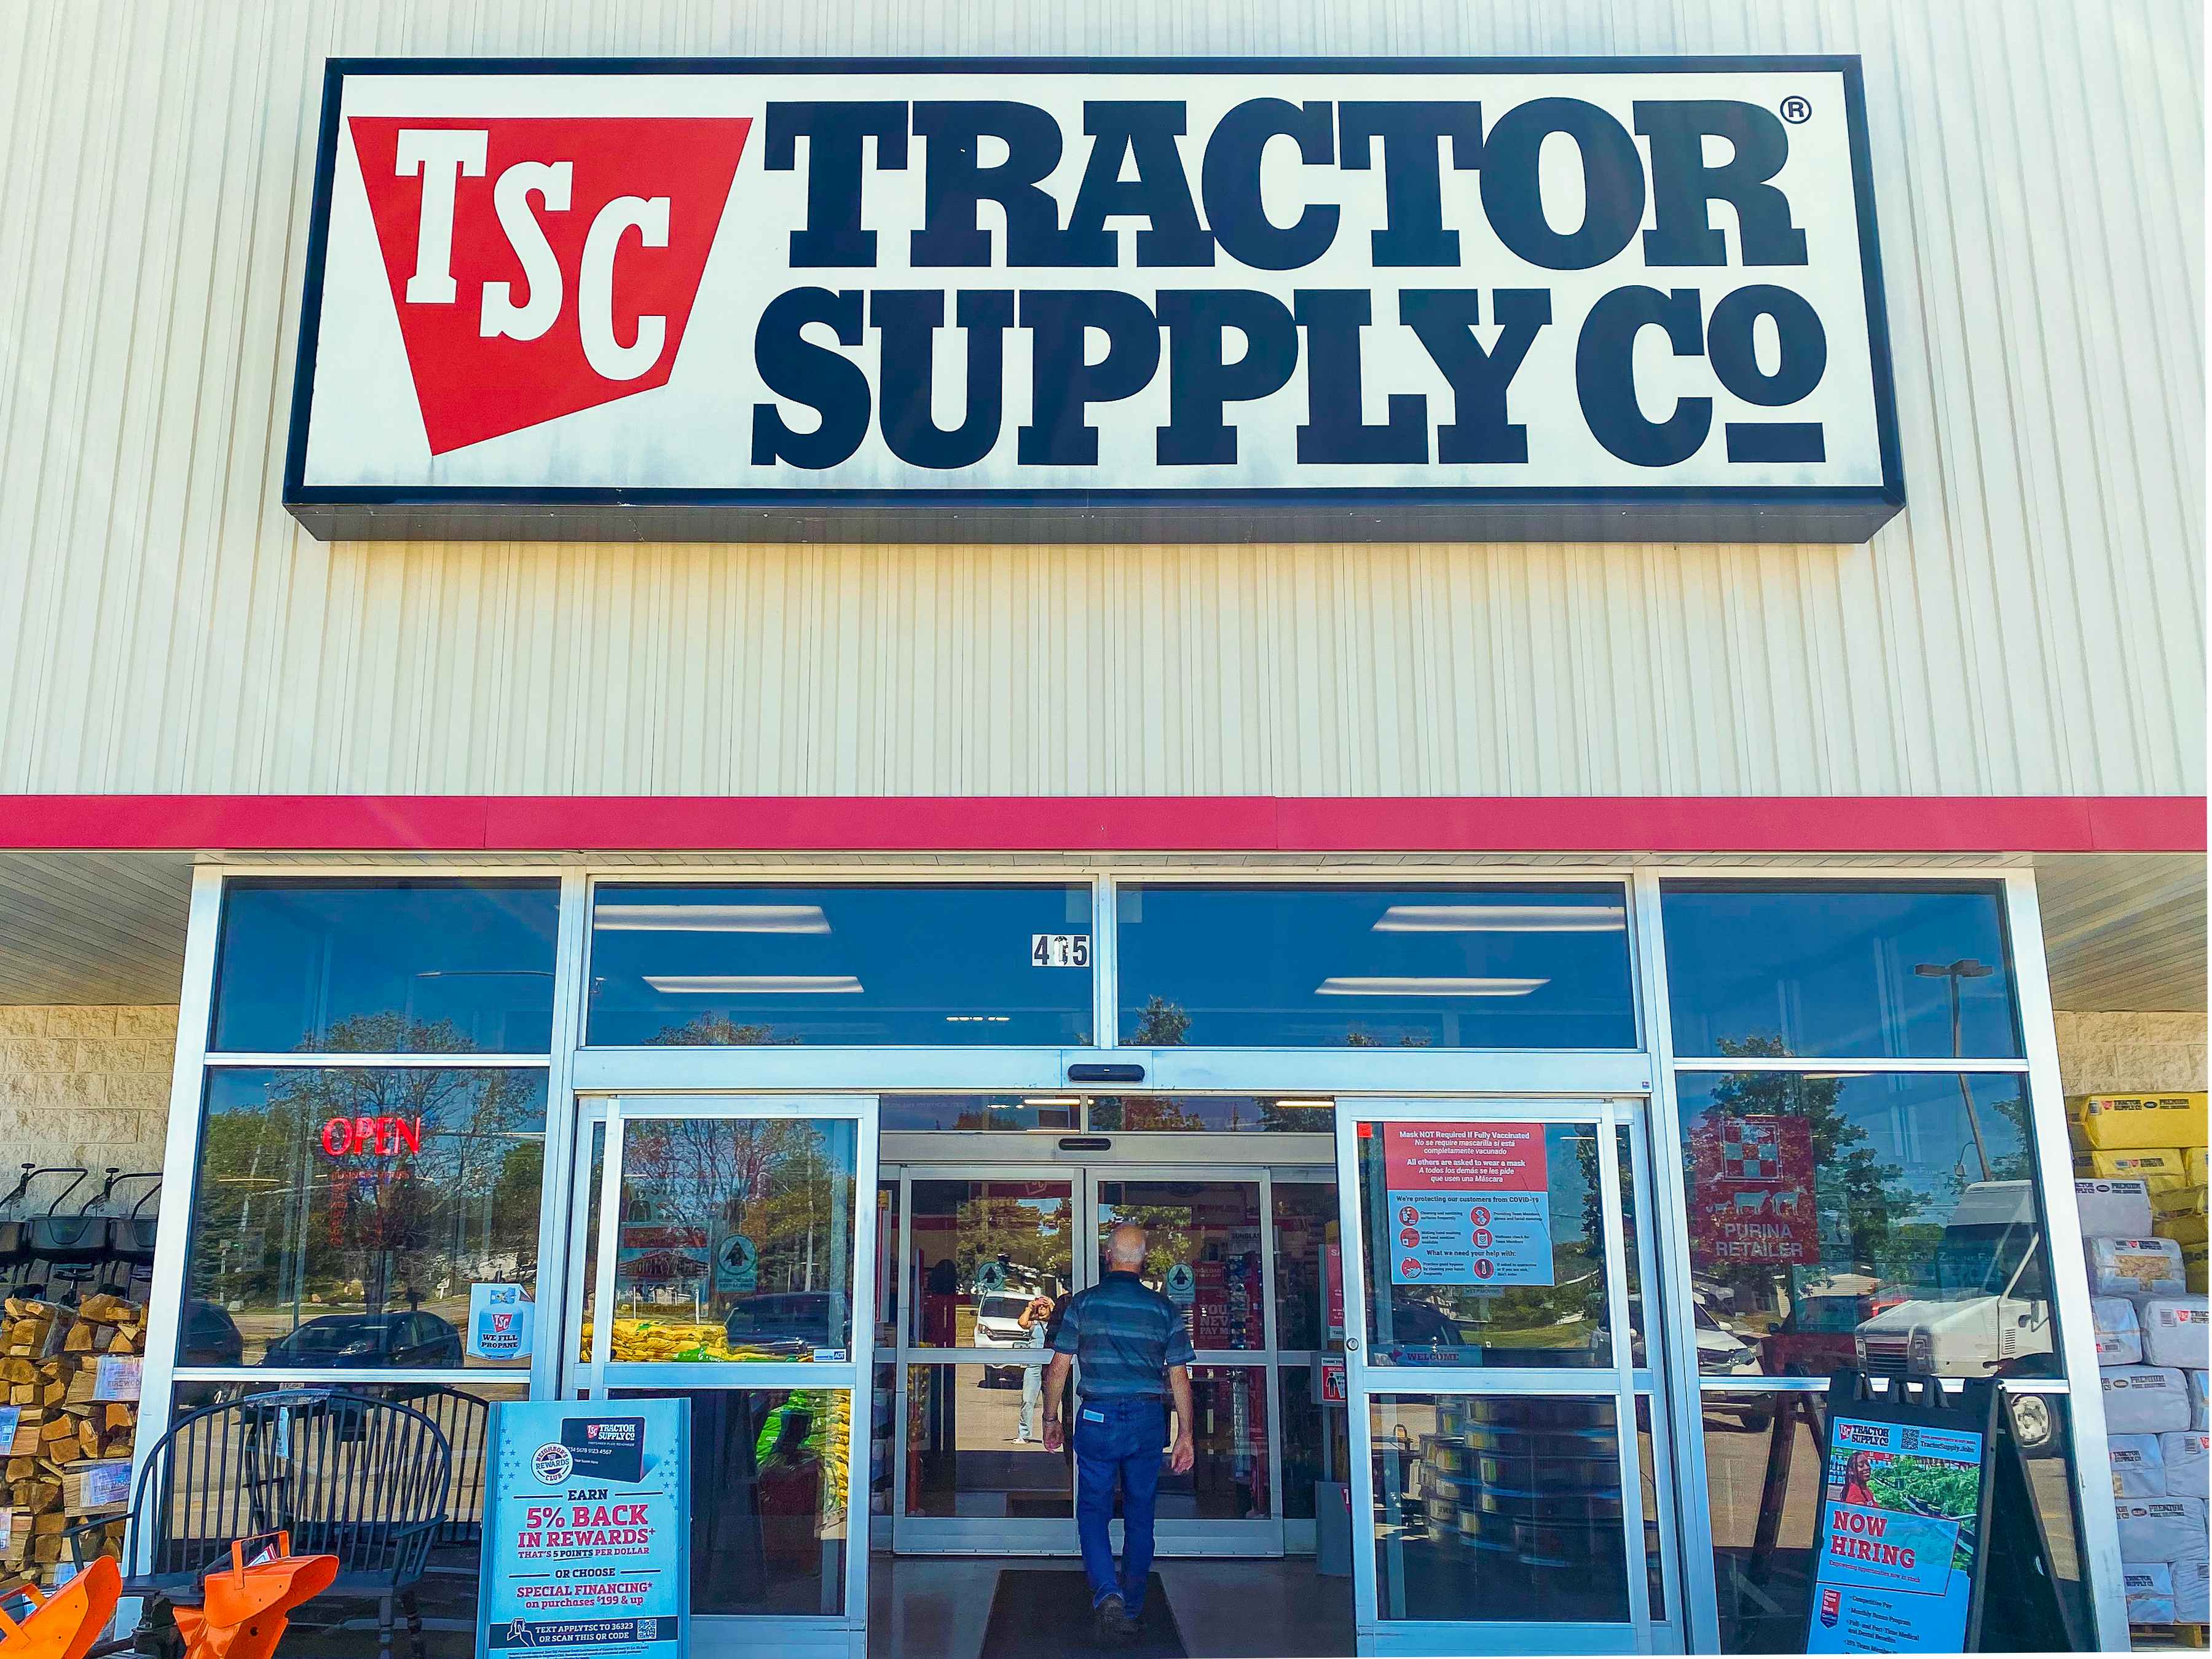 A Tractor Supply Company storefront.